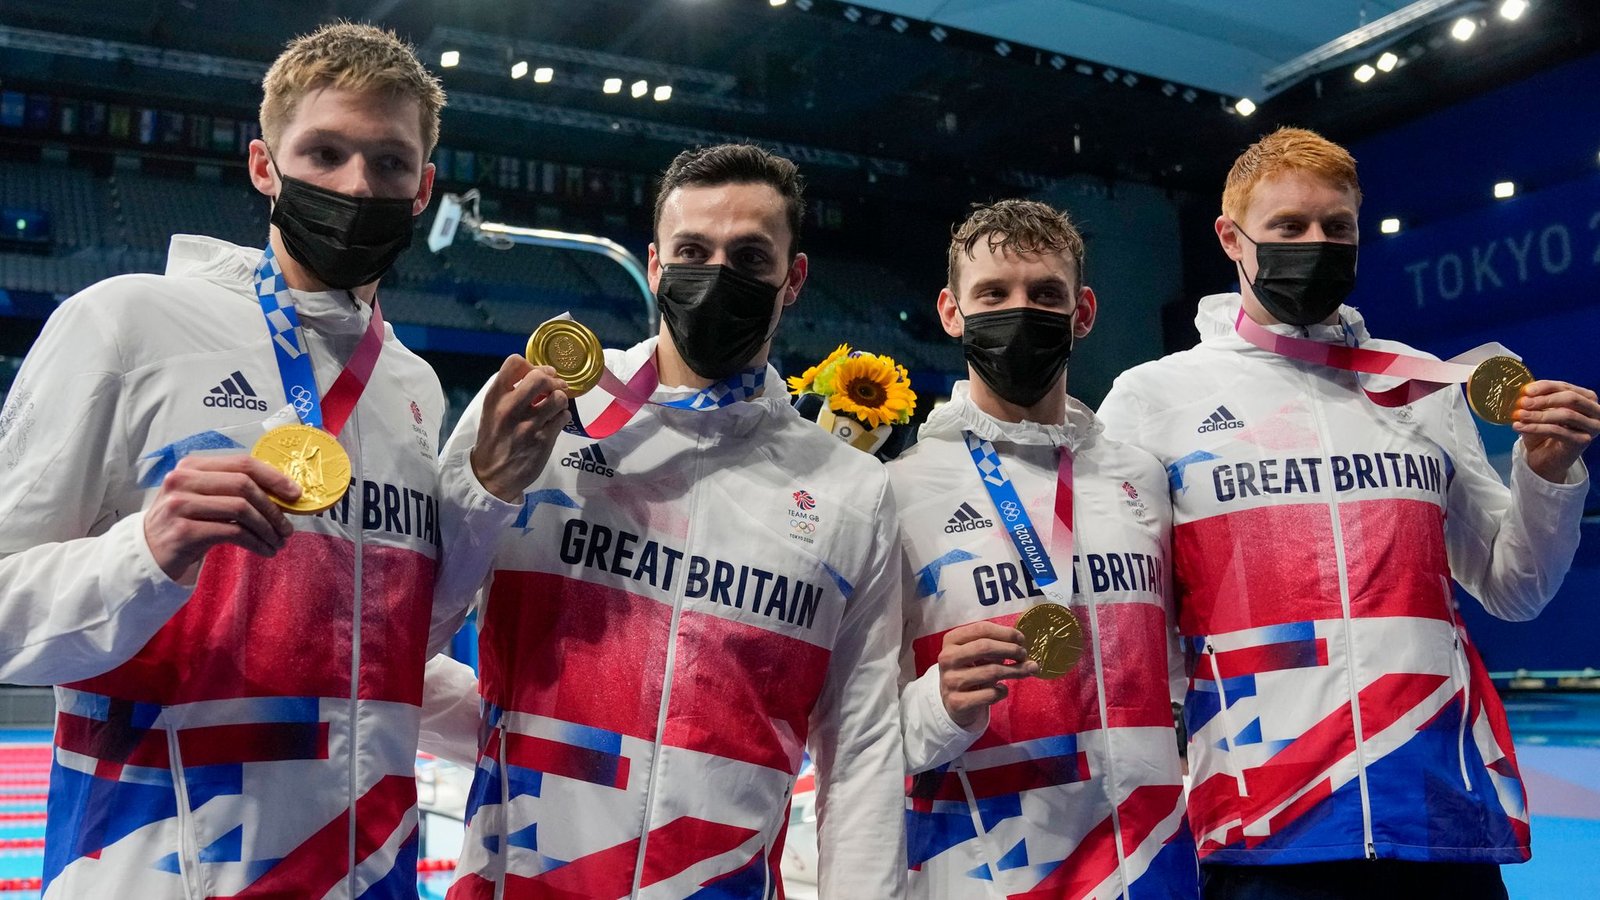 Great Britain won gold in relay